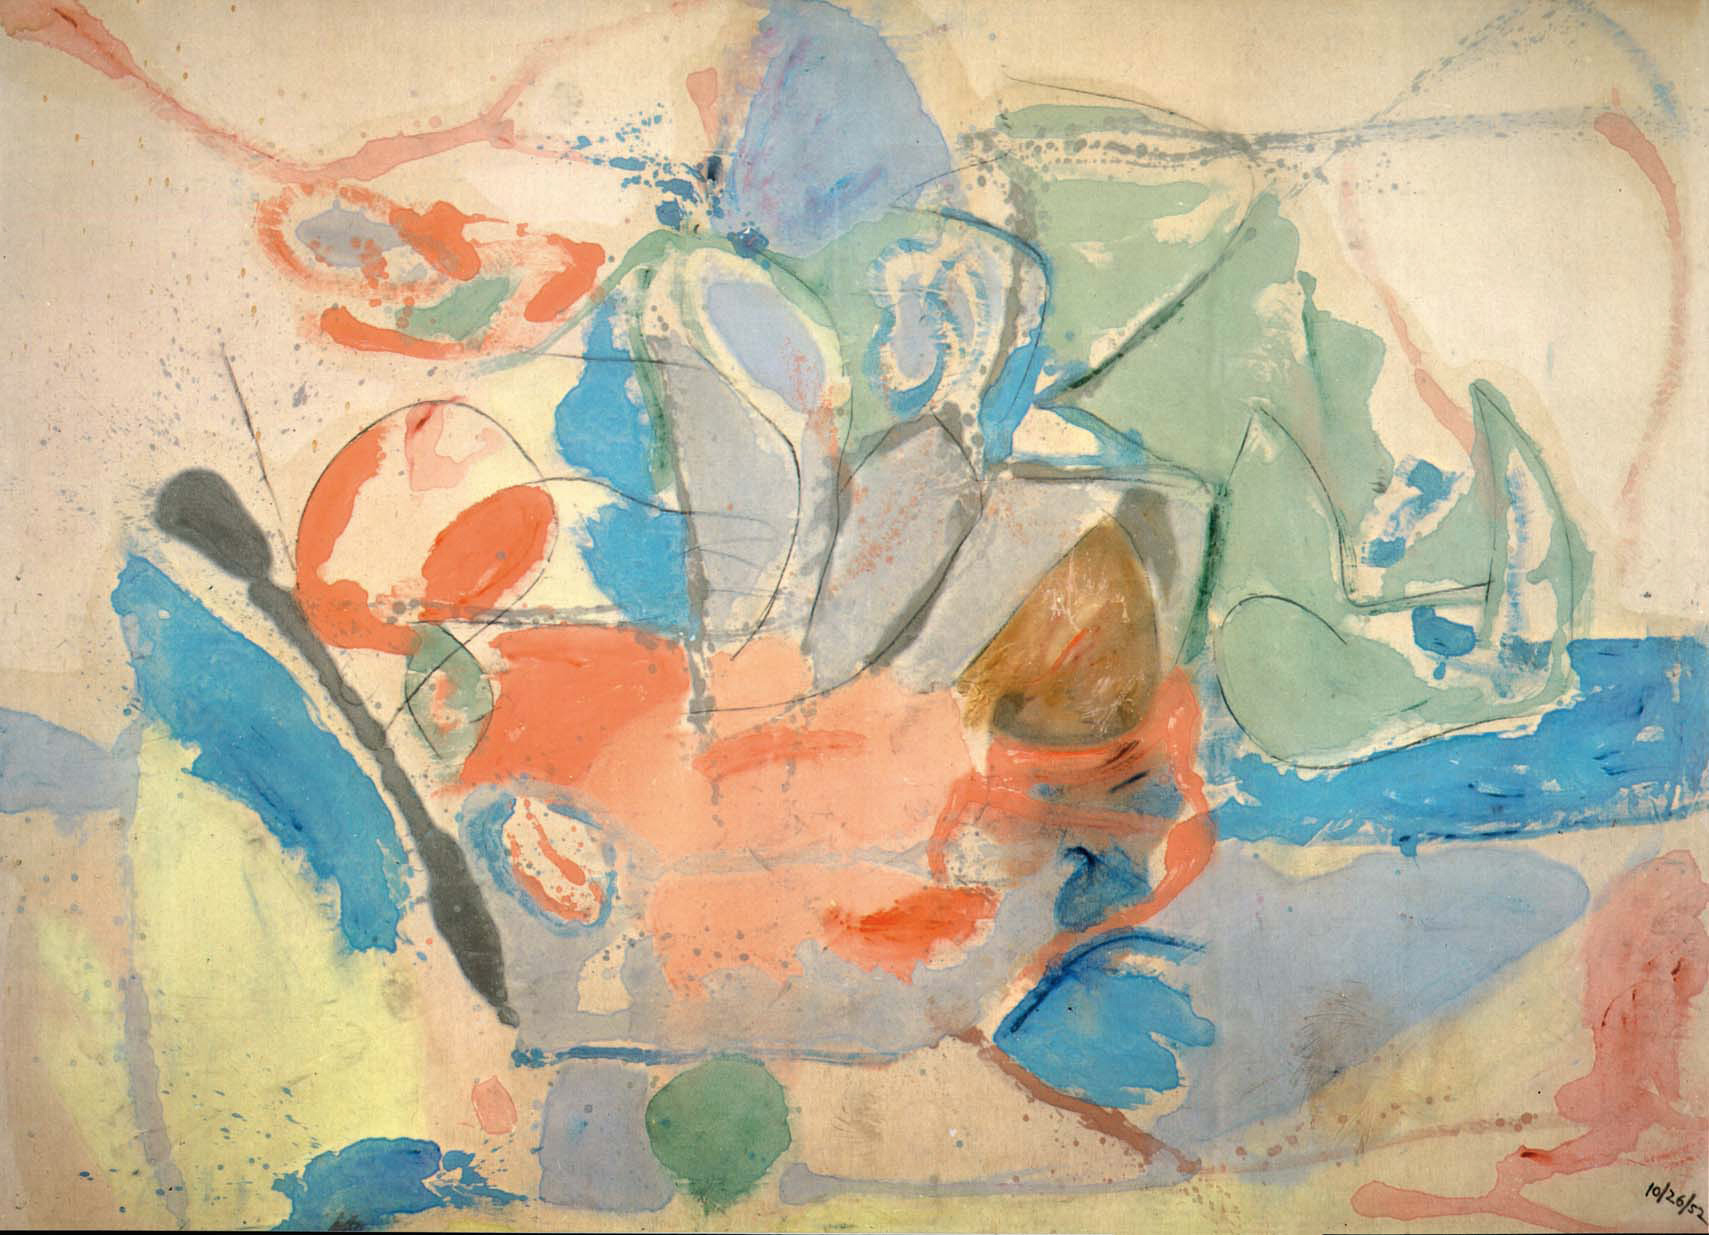  Mountains and Sea (1952) by Helen Frankenthaler. As reproduced in Art in Time